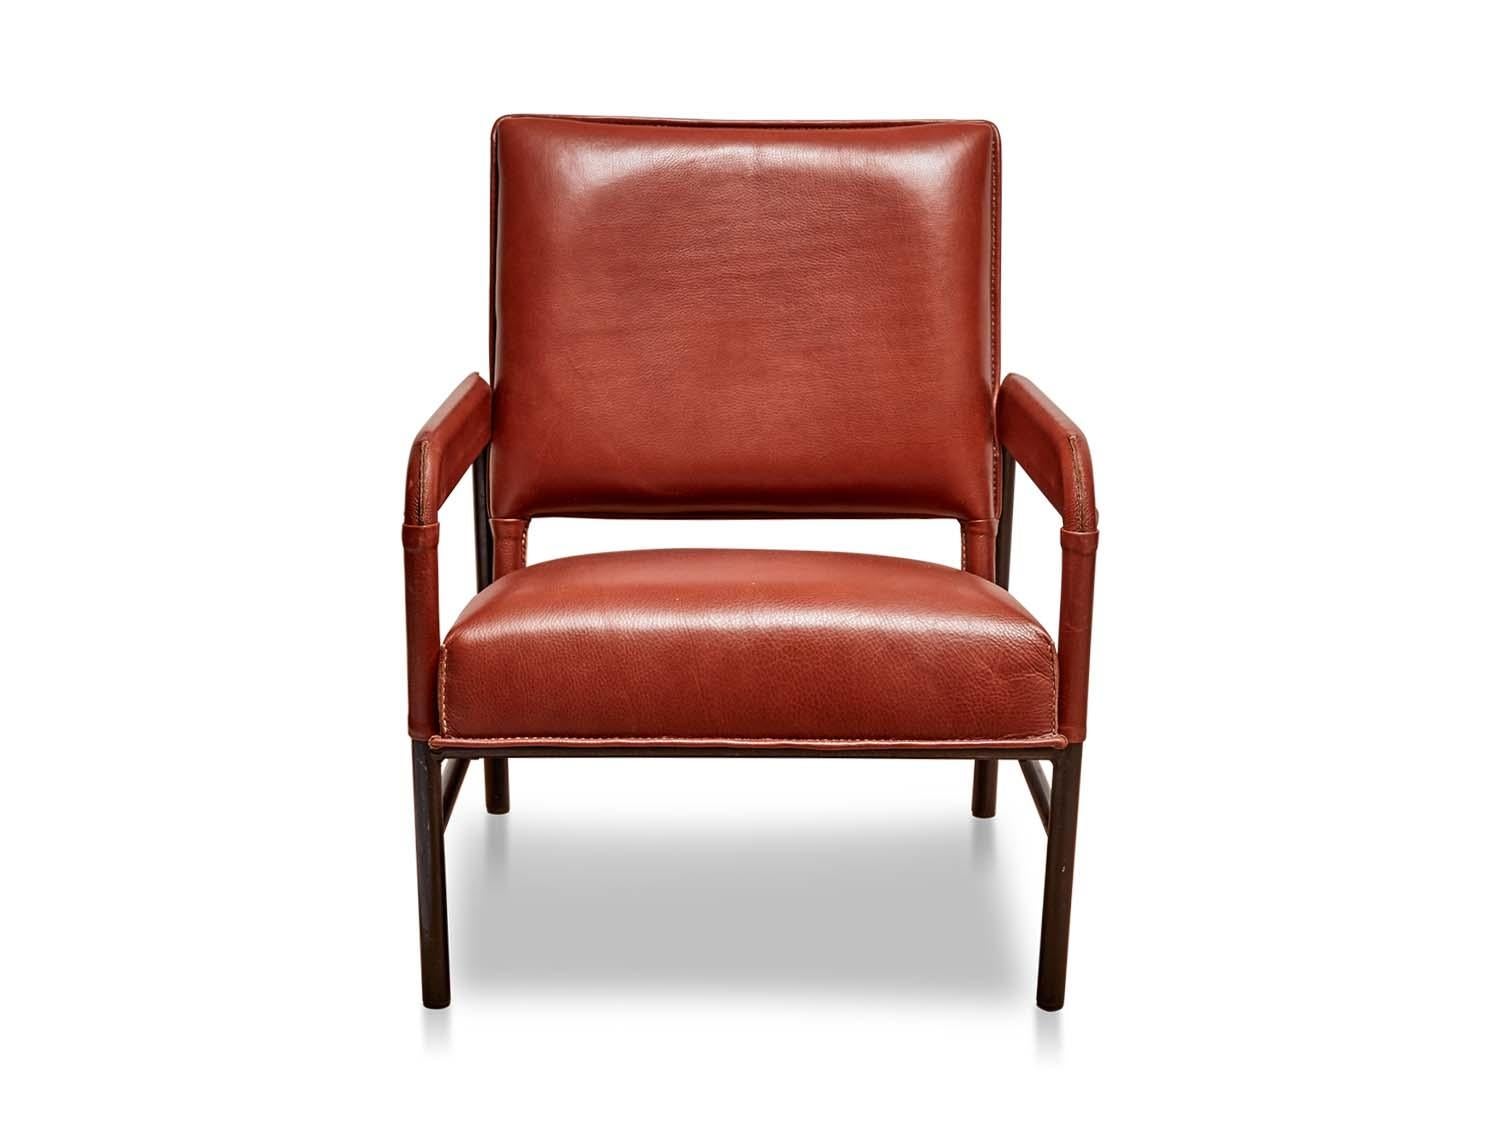 Jacques Adnet armchair
France, circa 1950s
Leather completely redone and restored.